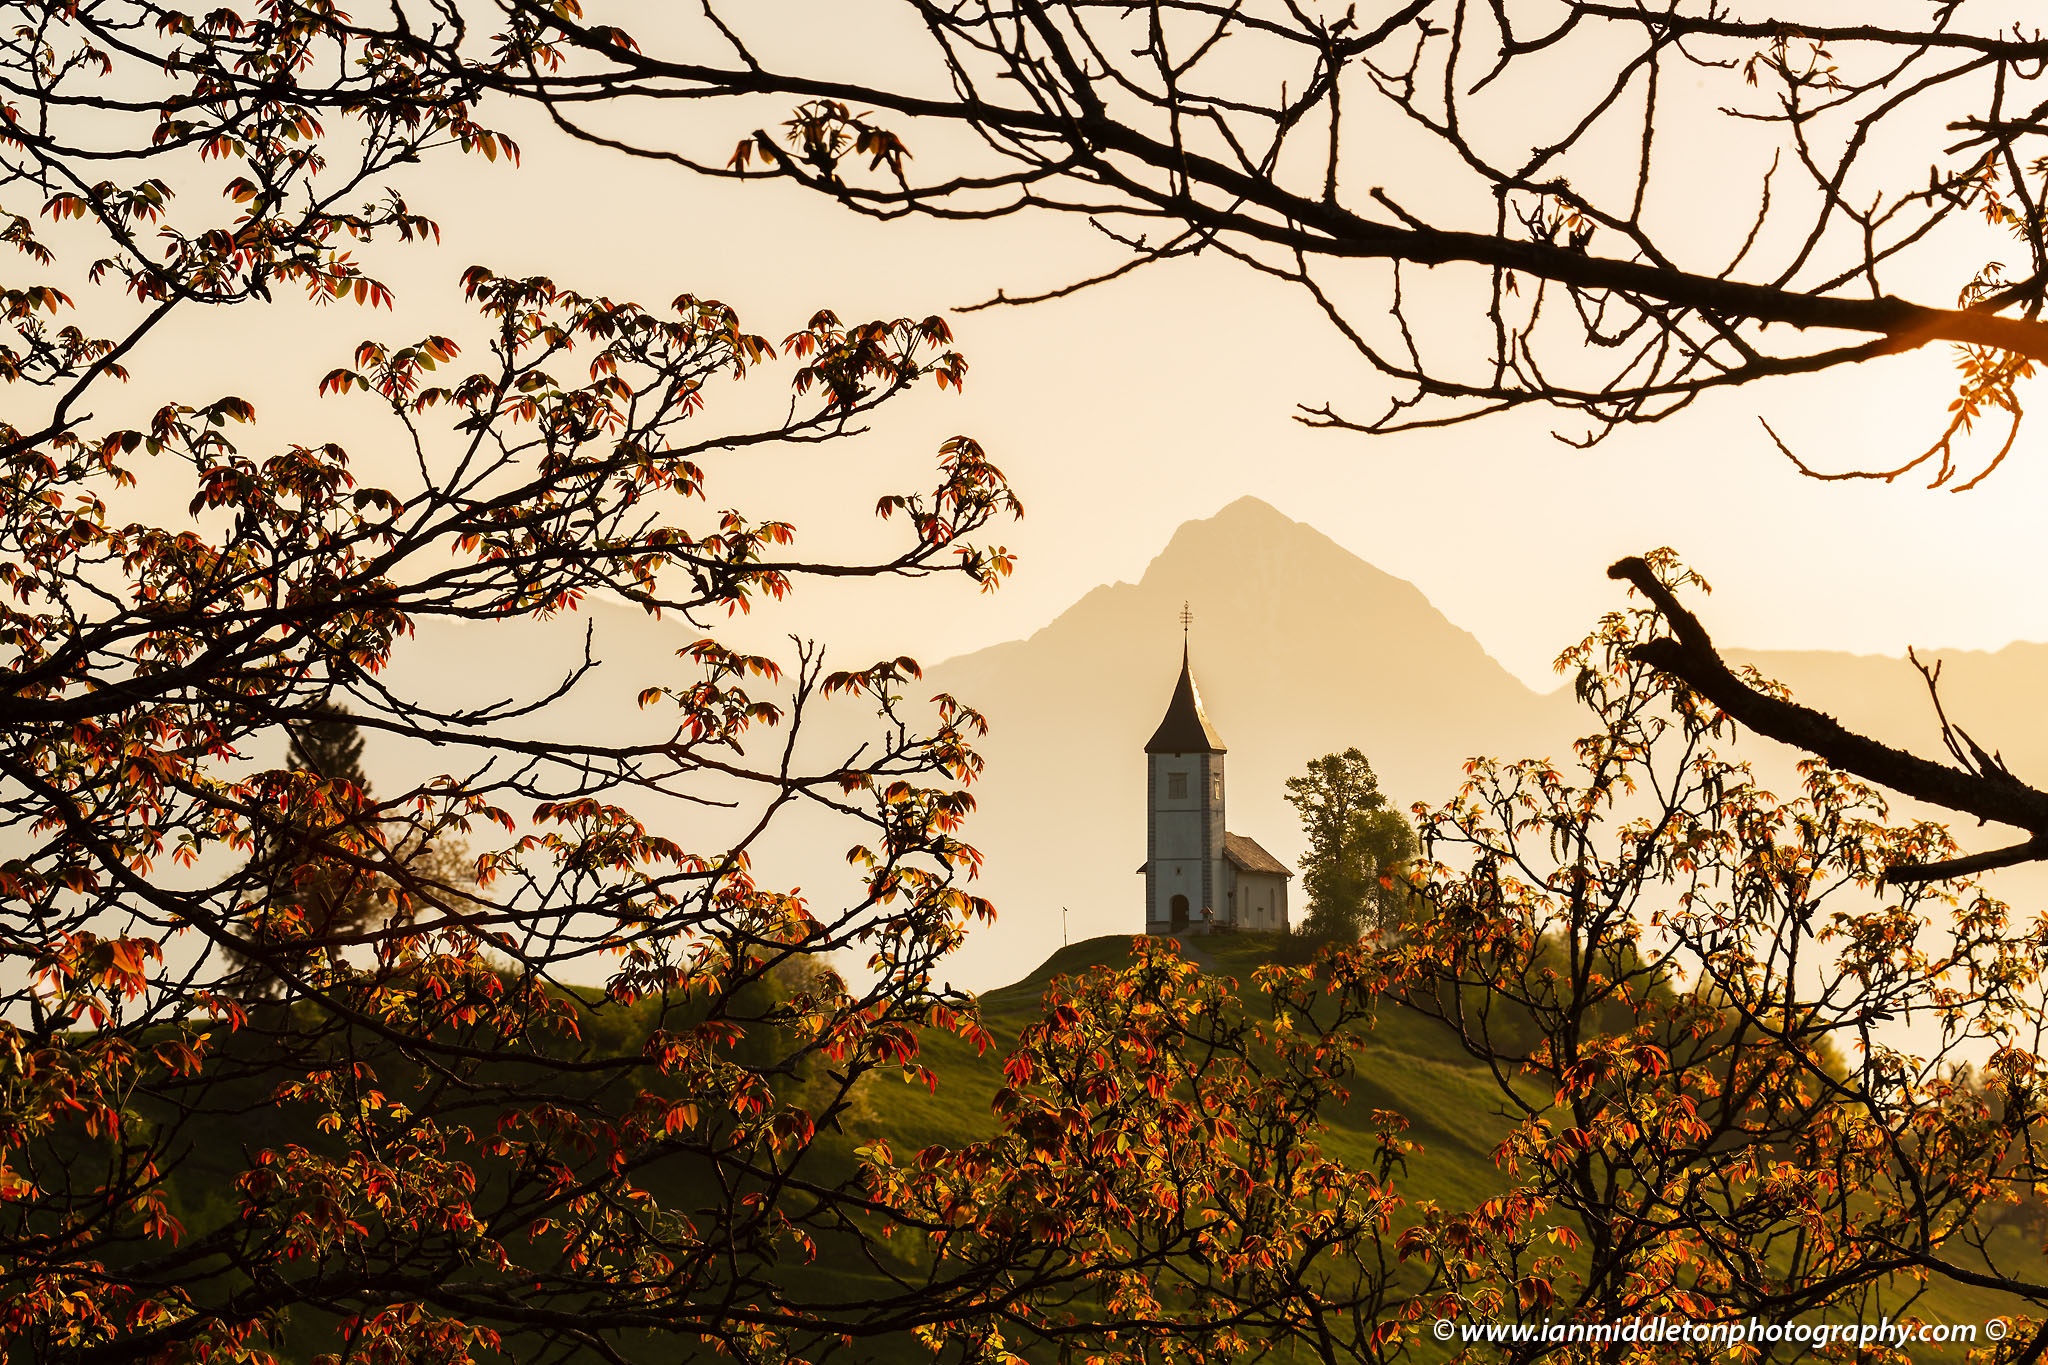 Sunrise at Jamnik church of Saints Primus and Felician, perched on a hill on the Jelovica Plateau with the kamnik alps and Storzic mountain in the background, Slovenia. Framed by some trees in Spring Bloom.